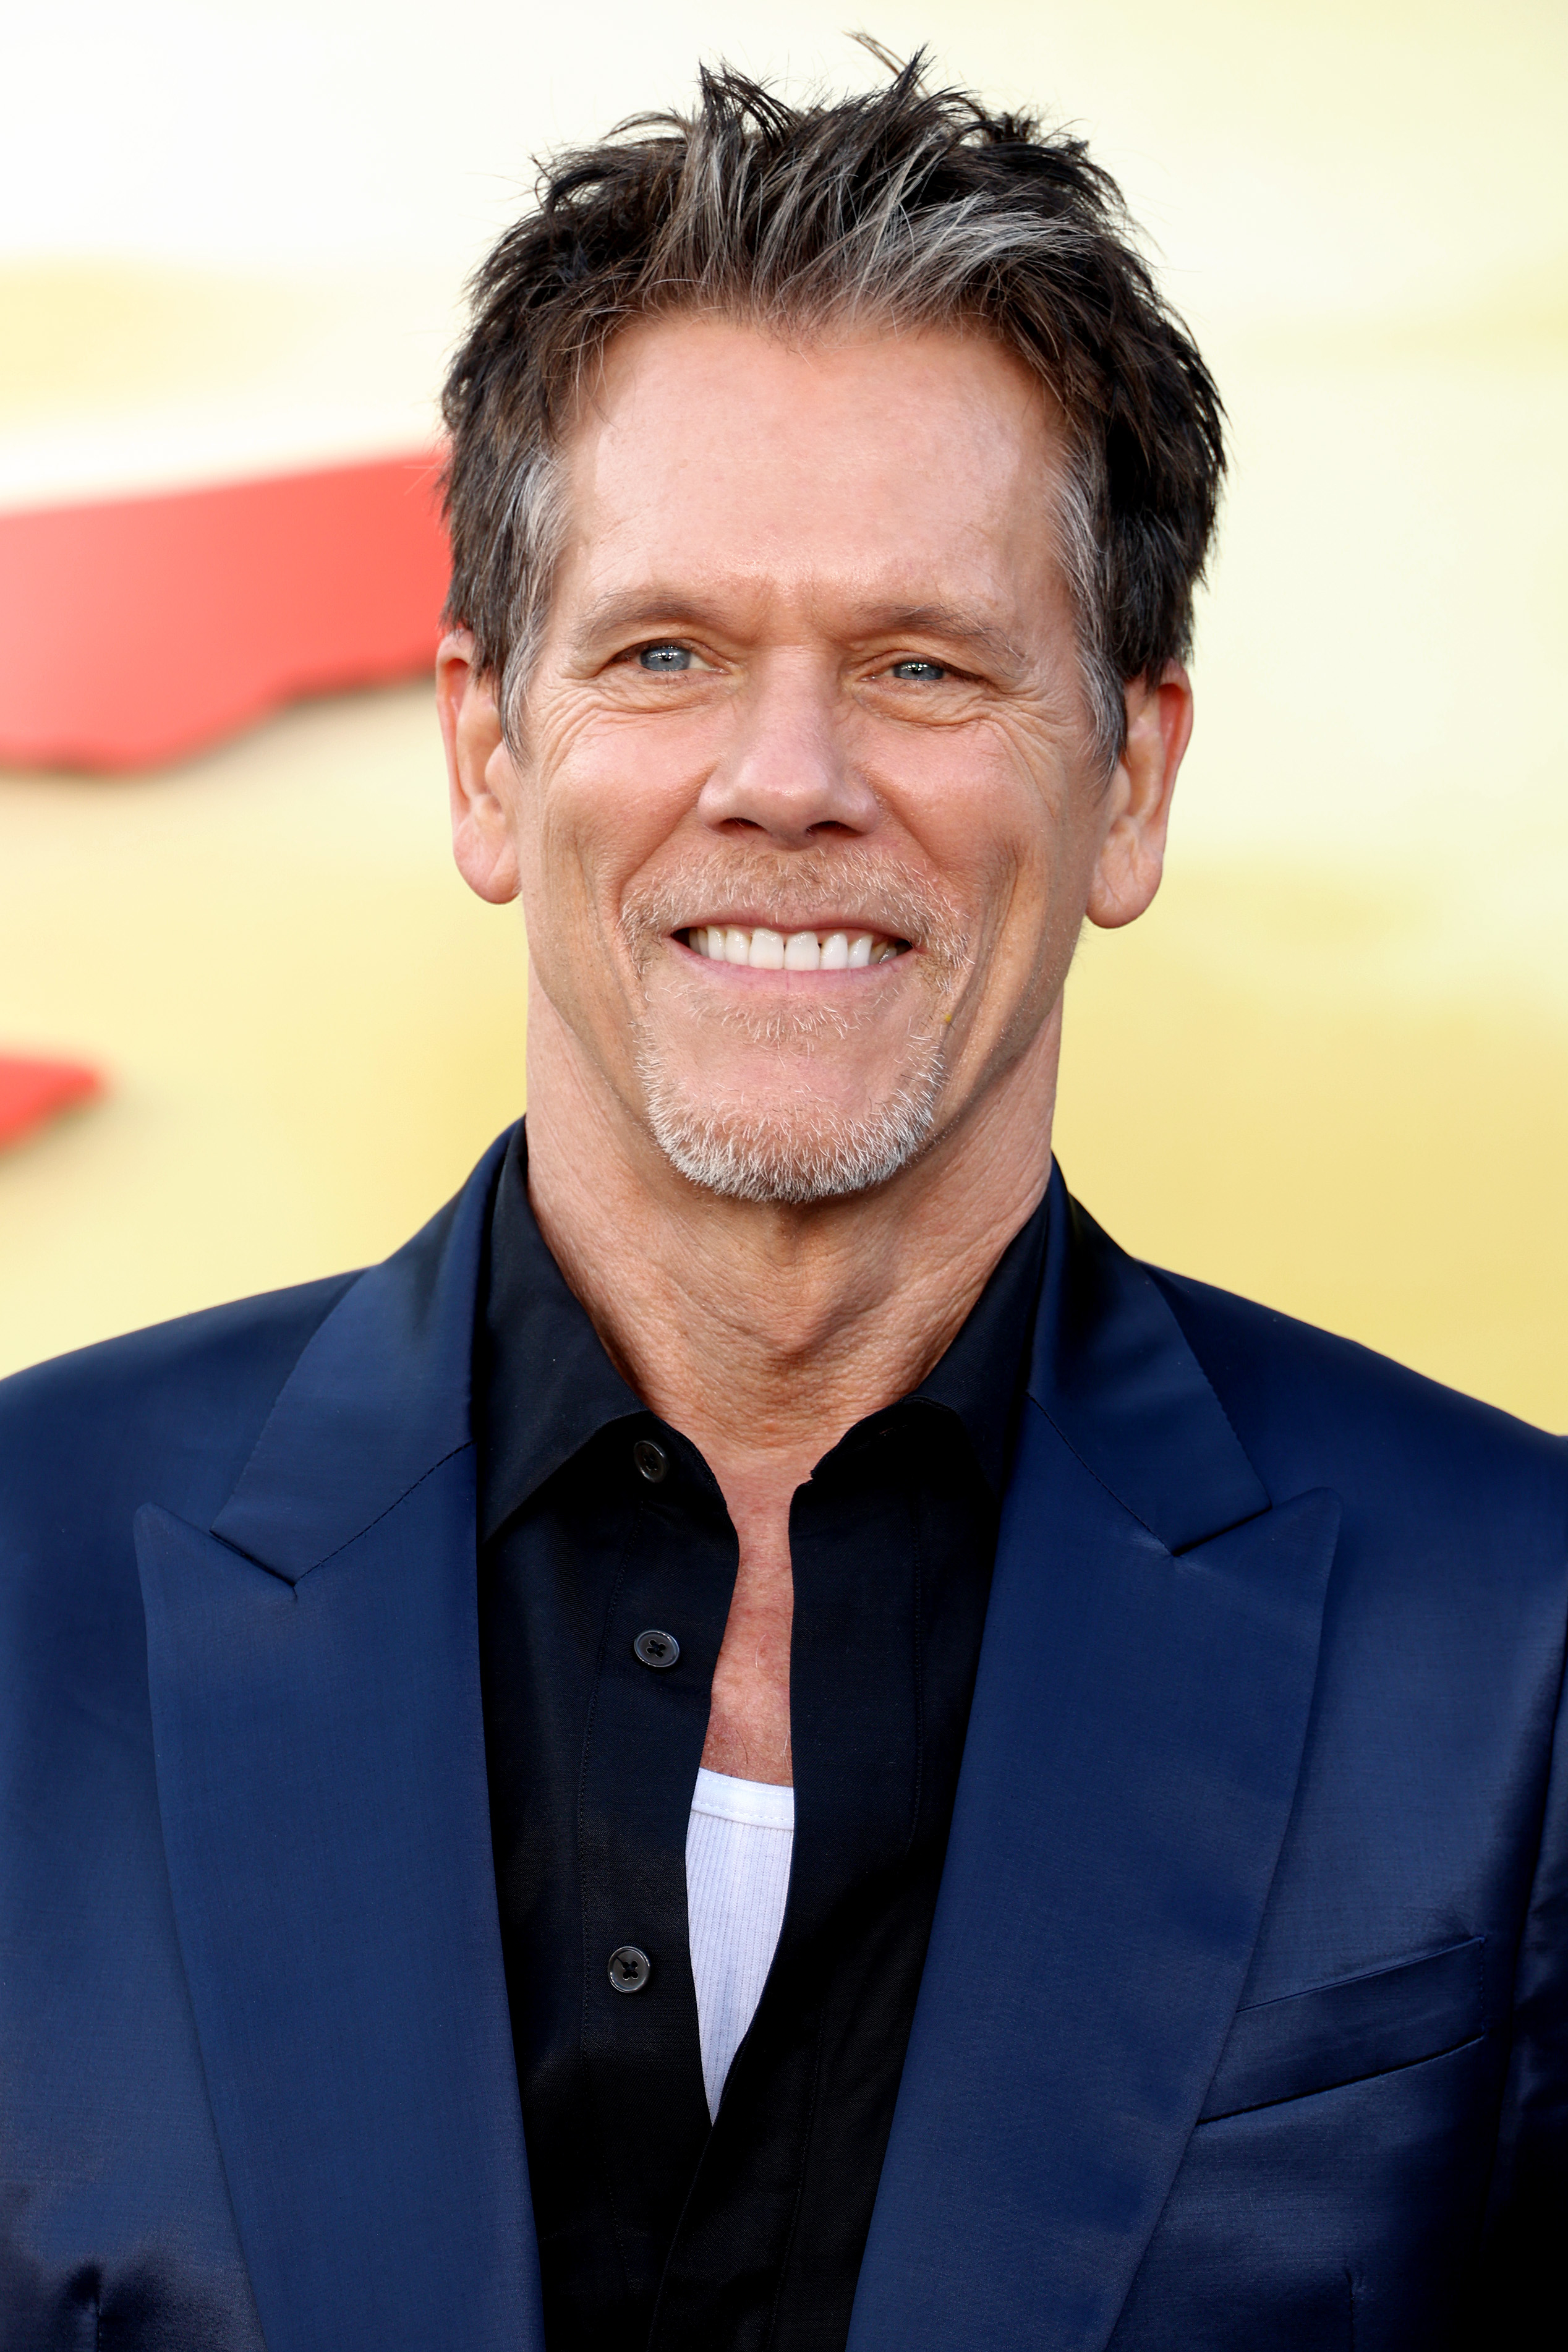 Kevin Bacon smiles on the red carpet, wearing a dark button-down shirt under a blazer